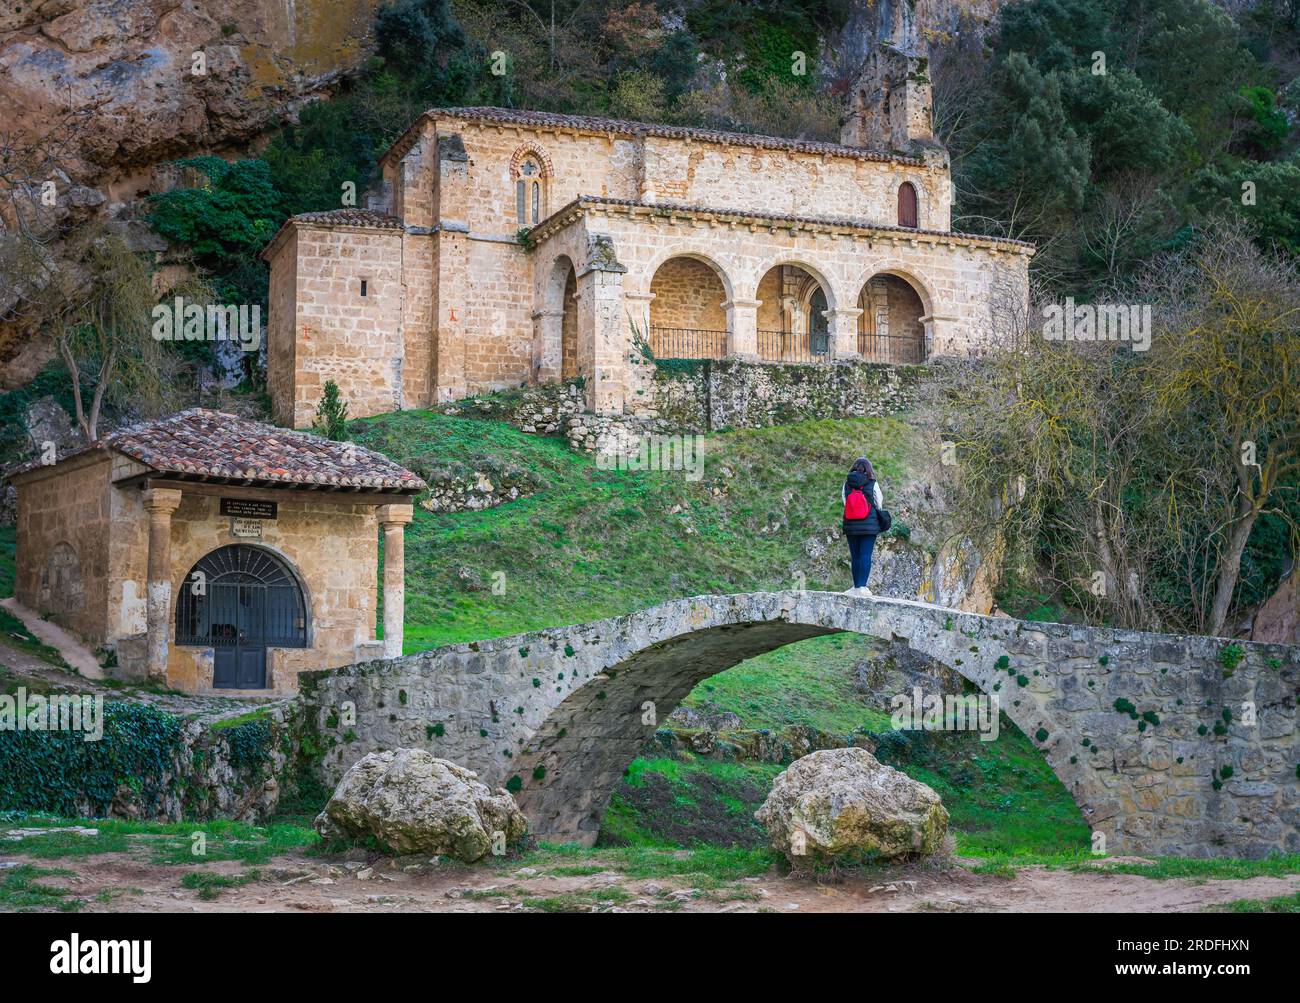 Image of a woman staring at the Hermitage of Santa María de la Hoz in the village of Tobera, located in the north of the province of Burgos (Spain) Stock Photo